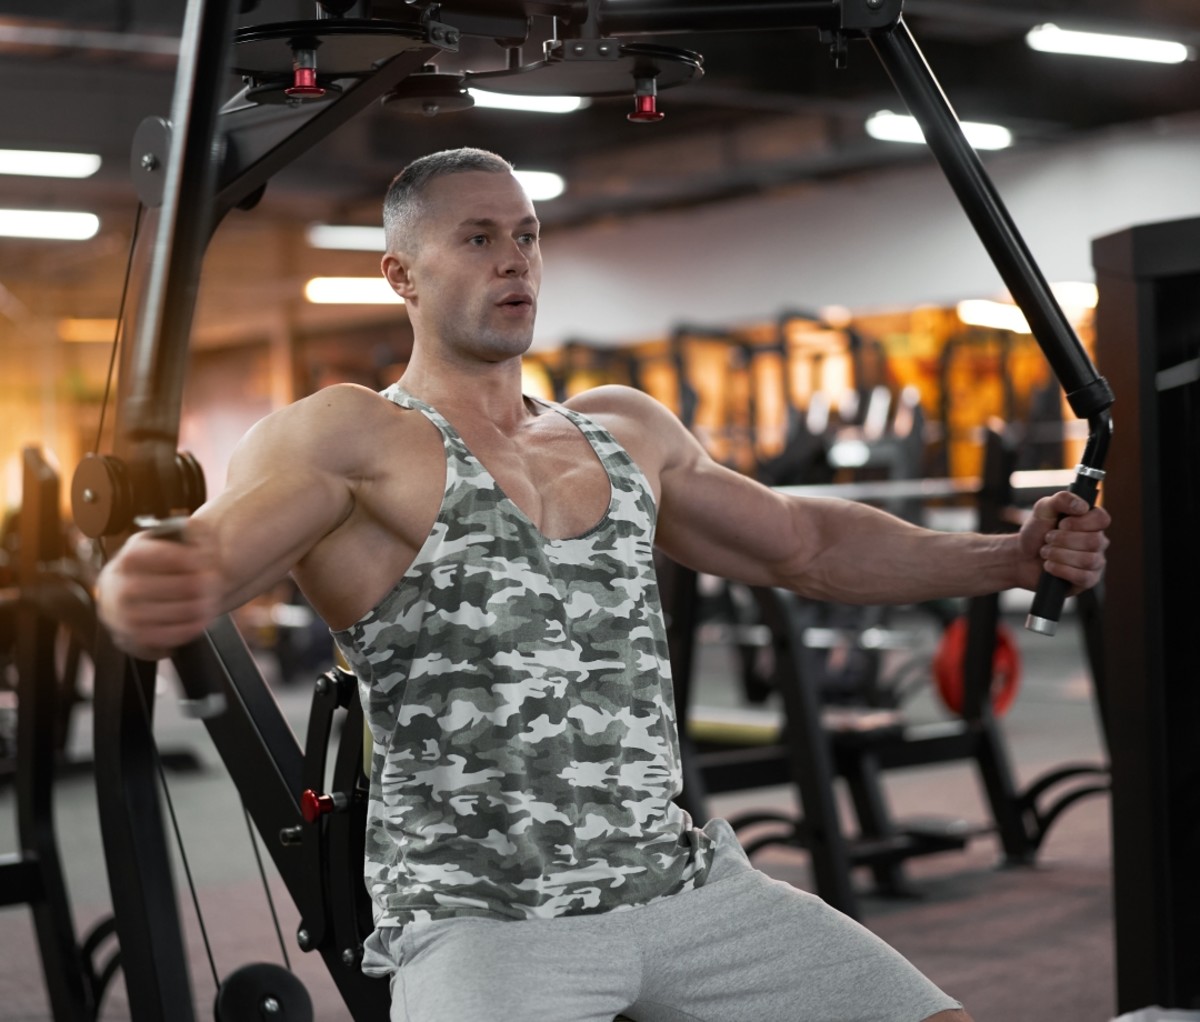 7 Best Gym Machines to Use in a Workout